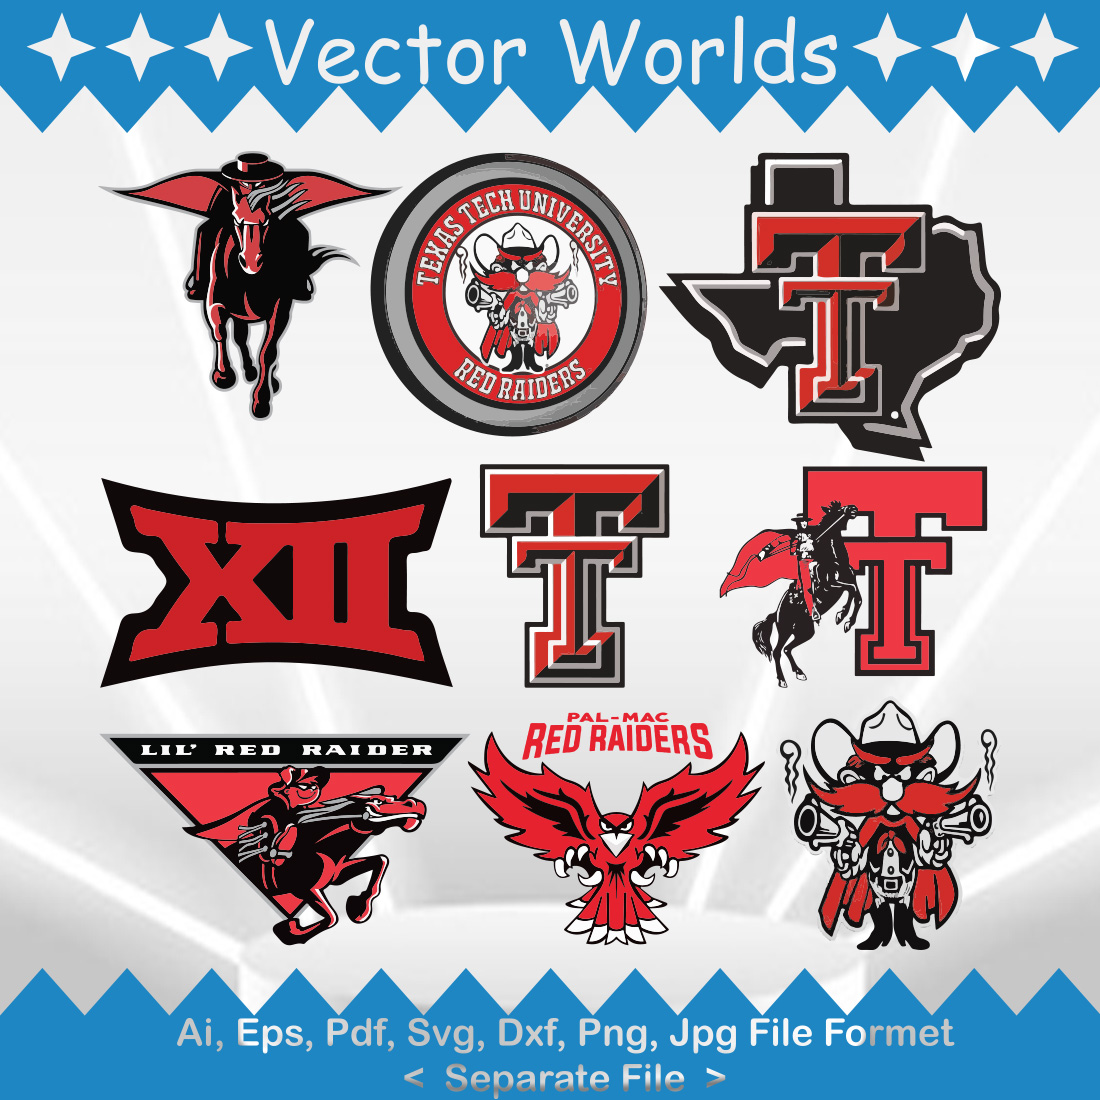 Texas Tech Red Raiders SVG Vector Design preview image.